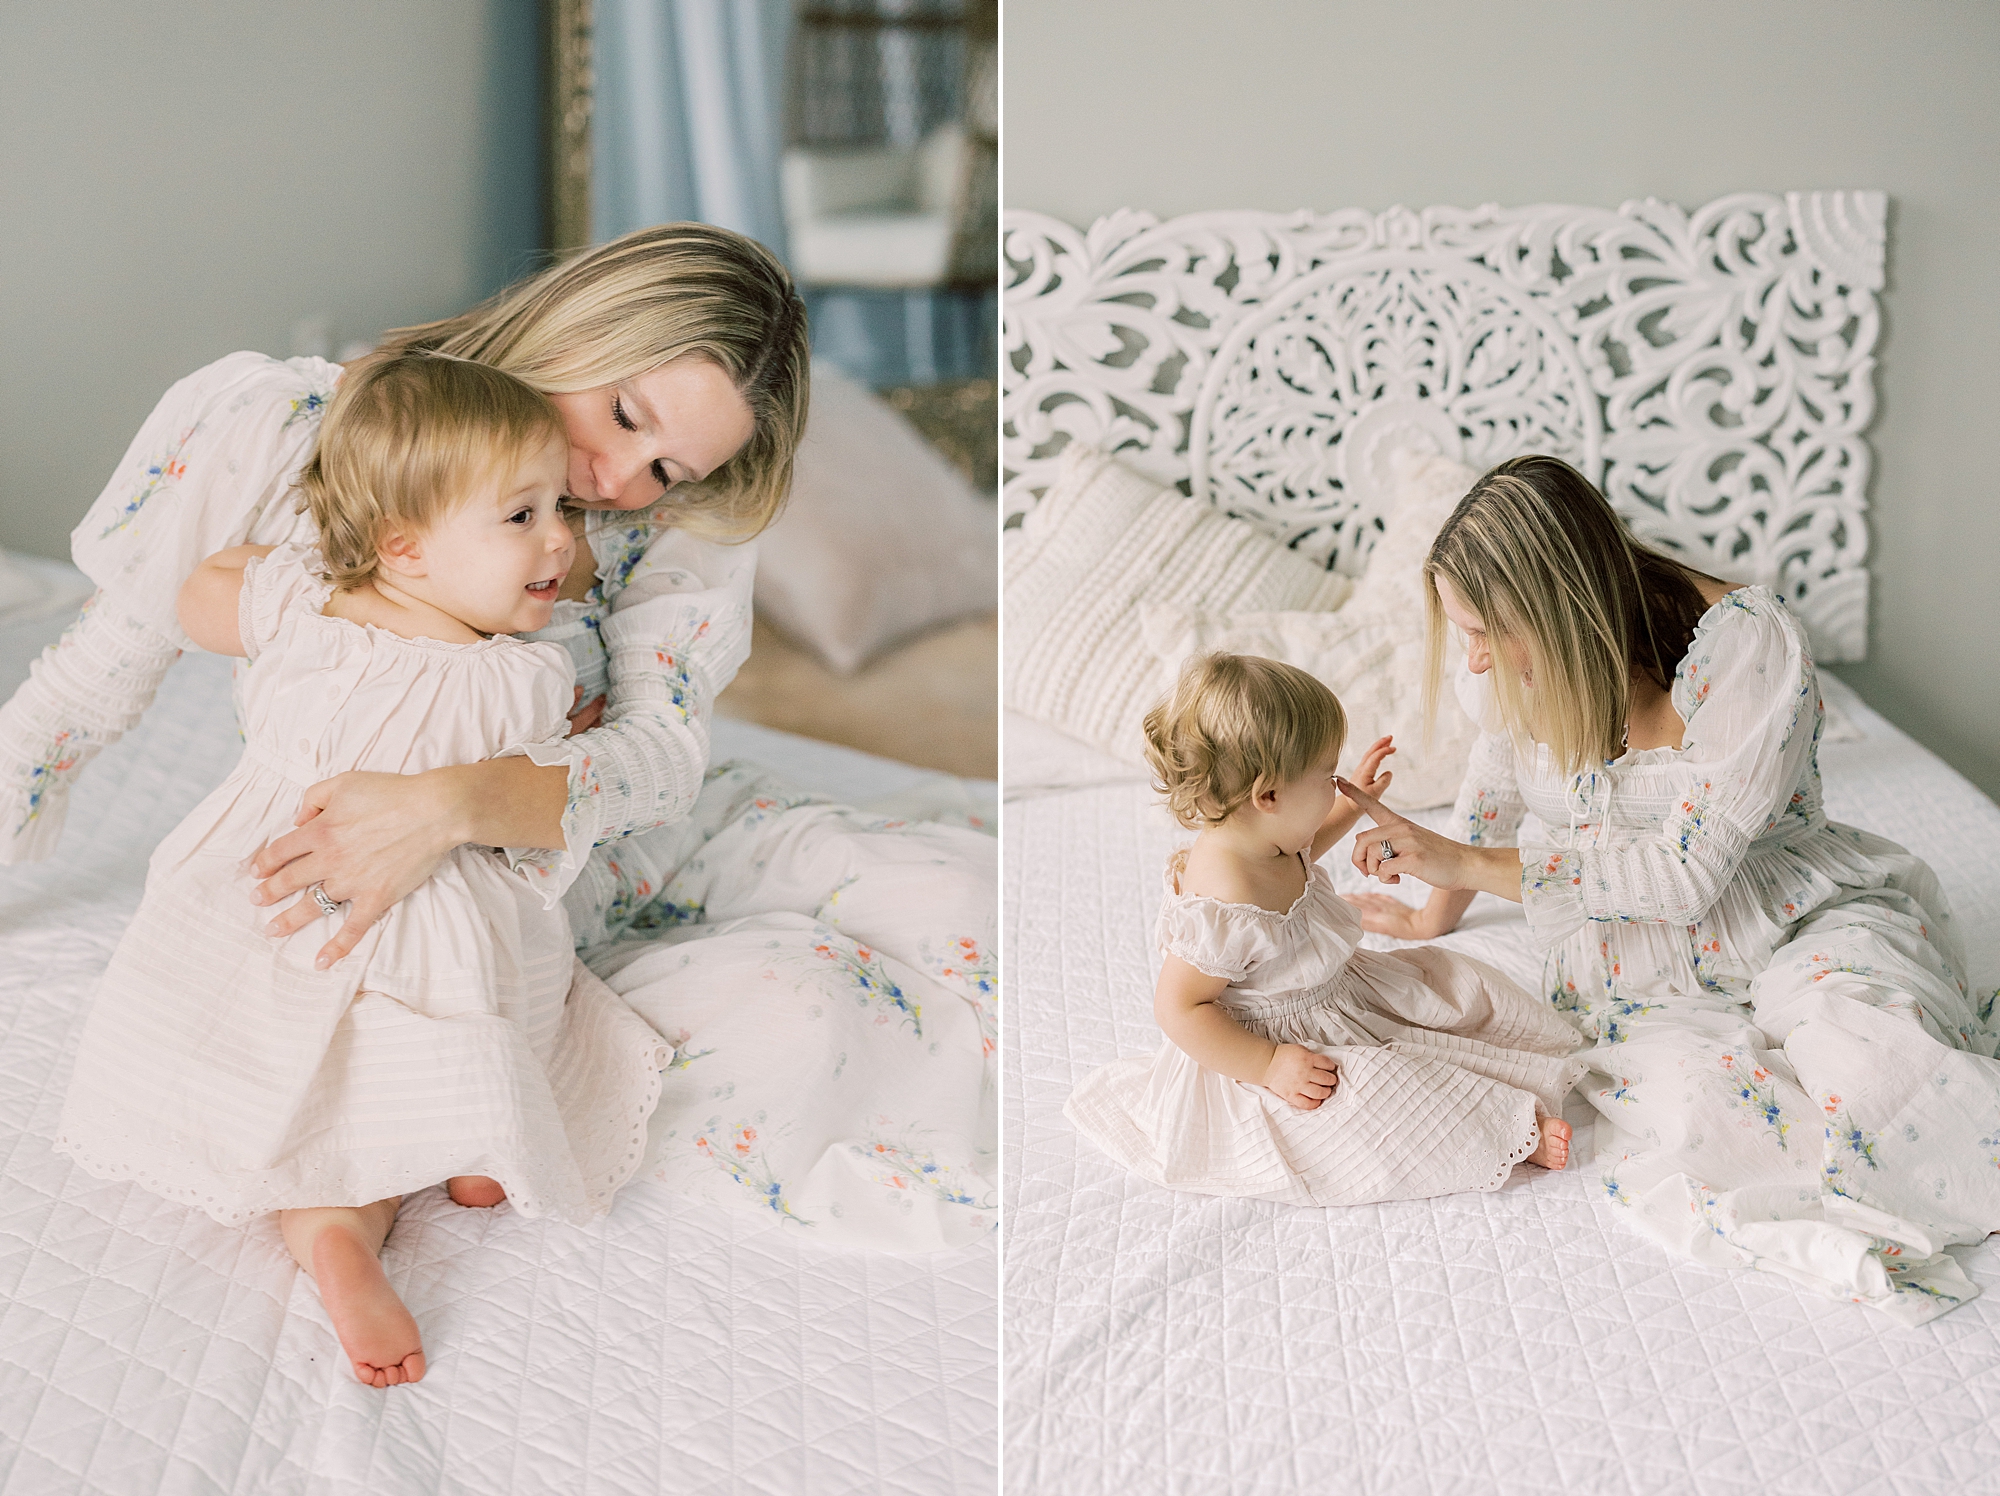 mom kisses and plays with toddler daughter on bed with white sheets